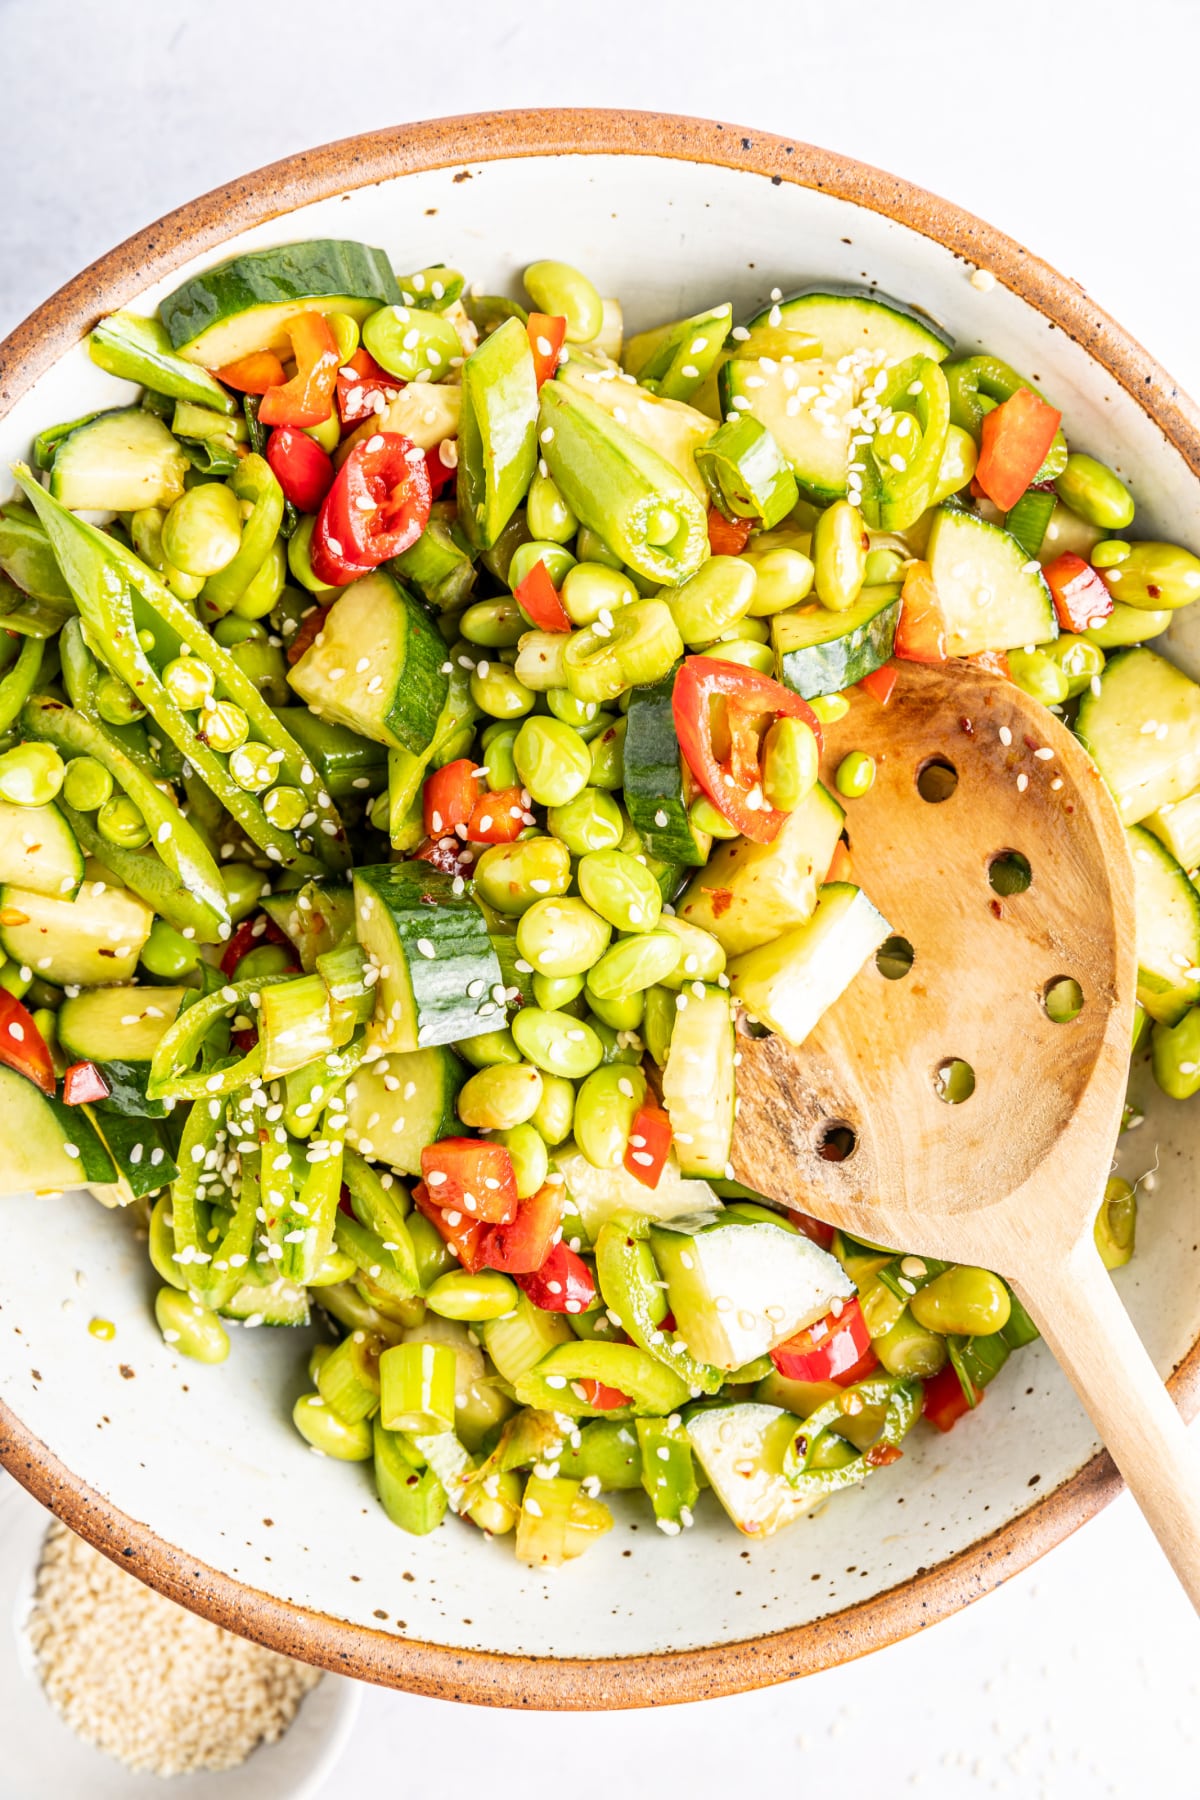 Overhead view of edamame cucumber salad in a bowl with a wooden slotted spoon: salad has edamame, cucumber, snap peas, red bell pepper, green onions, chili peppers and sesame seeds.